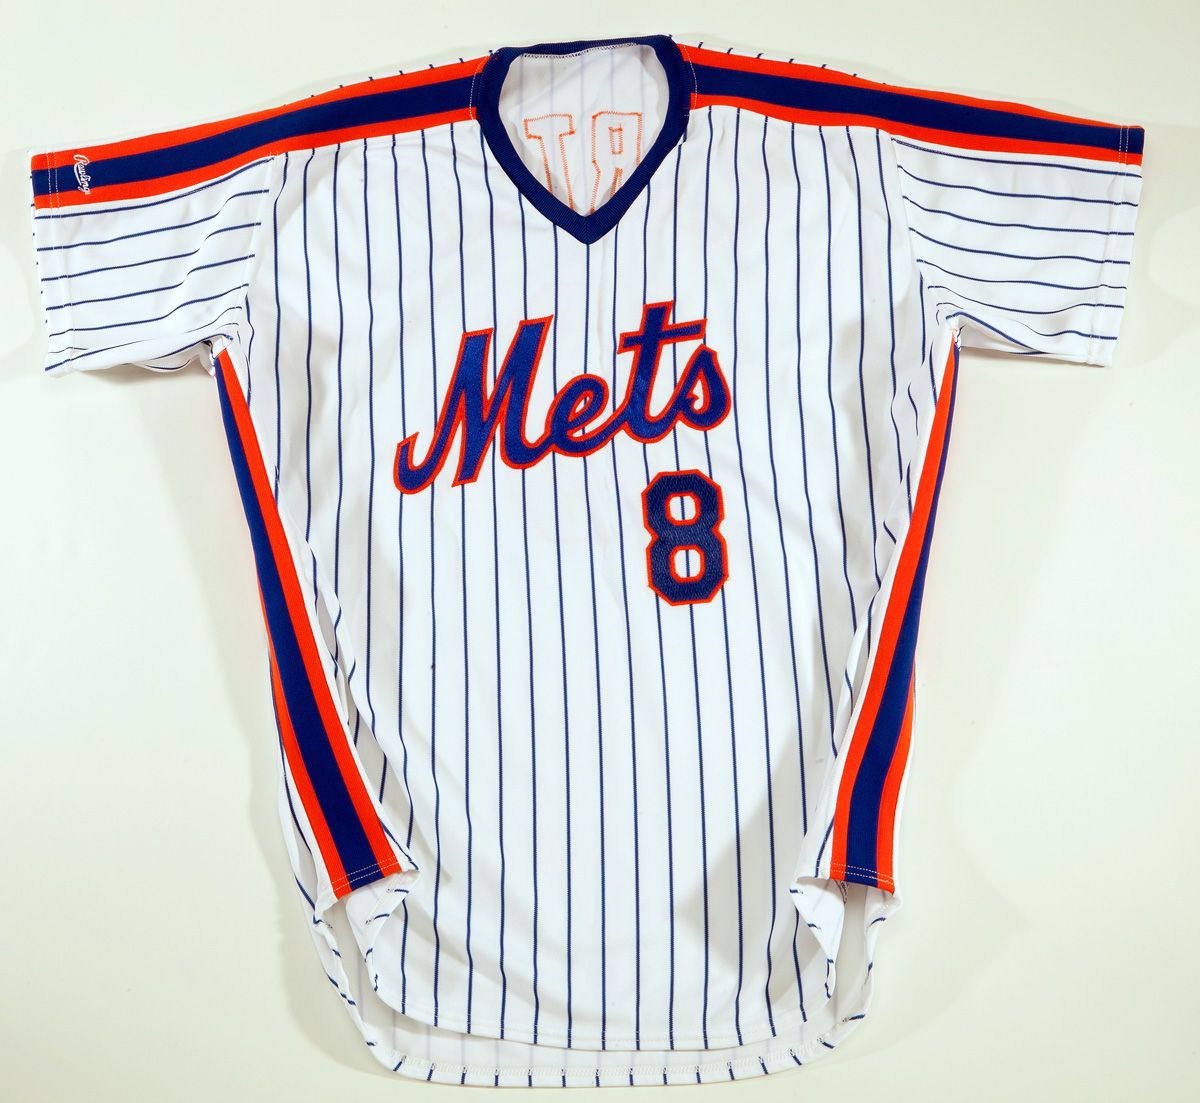 1986 New York Mets Replica Signed Jerseys Lot of 2 from The Gary, Lot  #81893